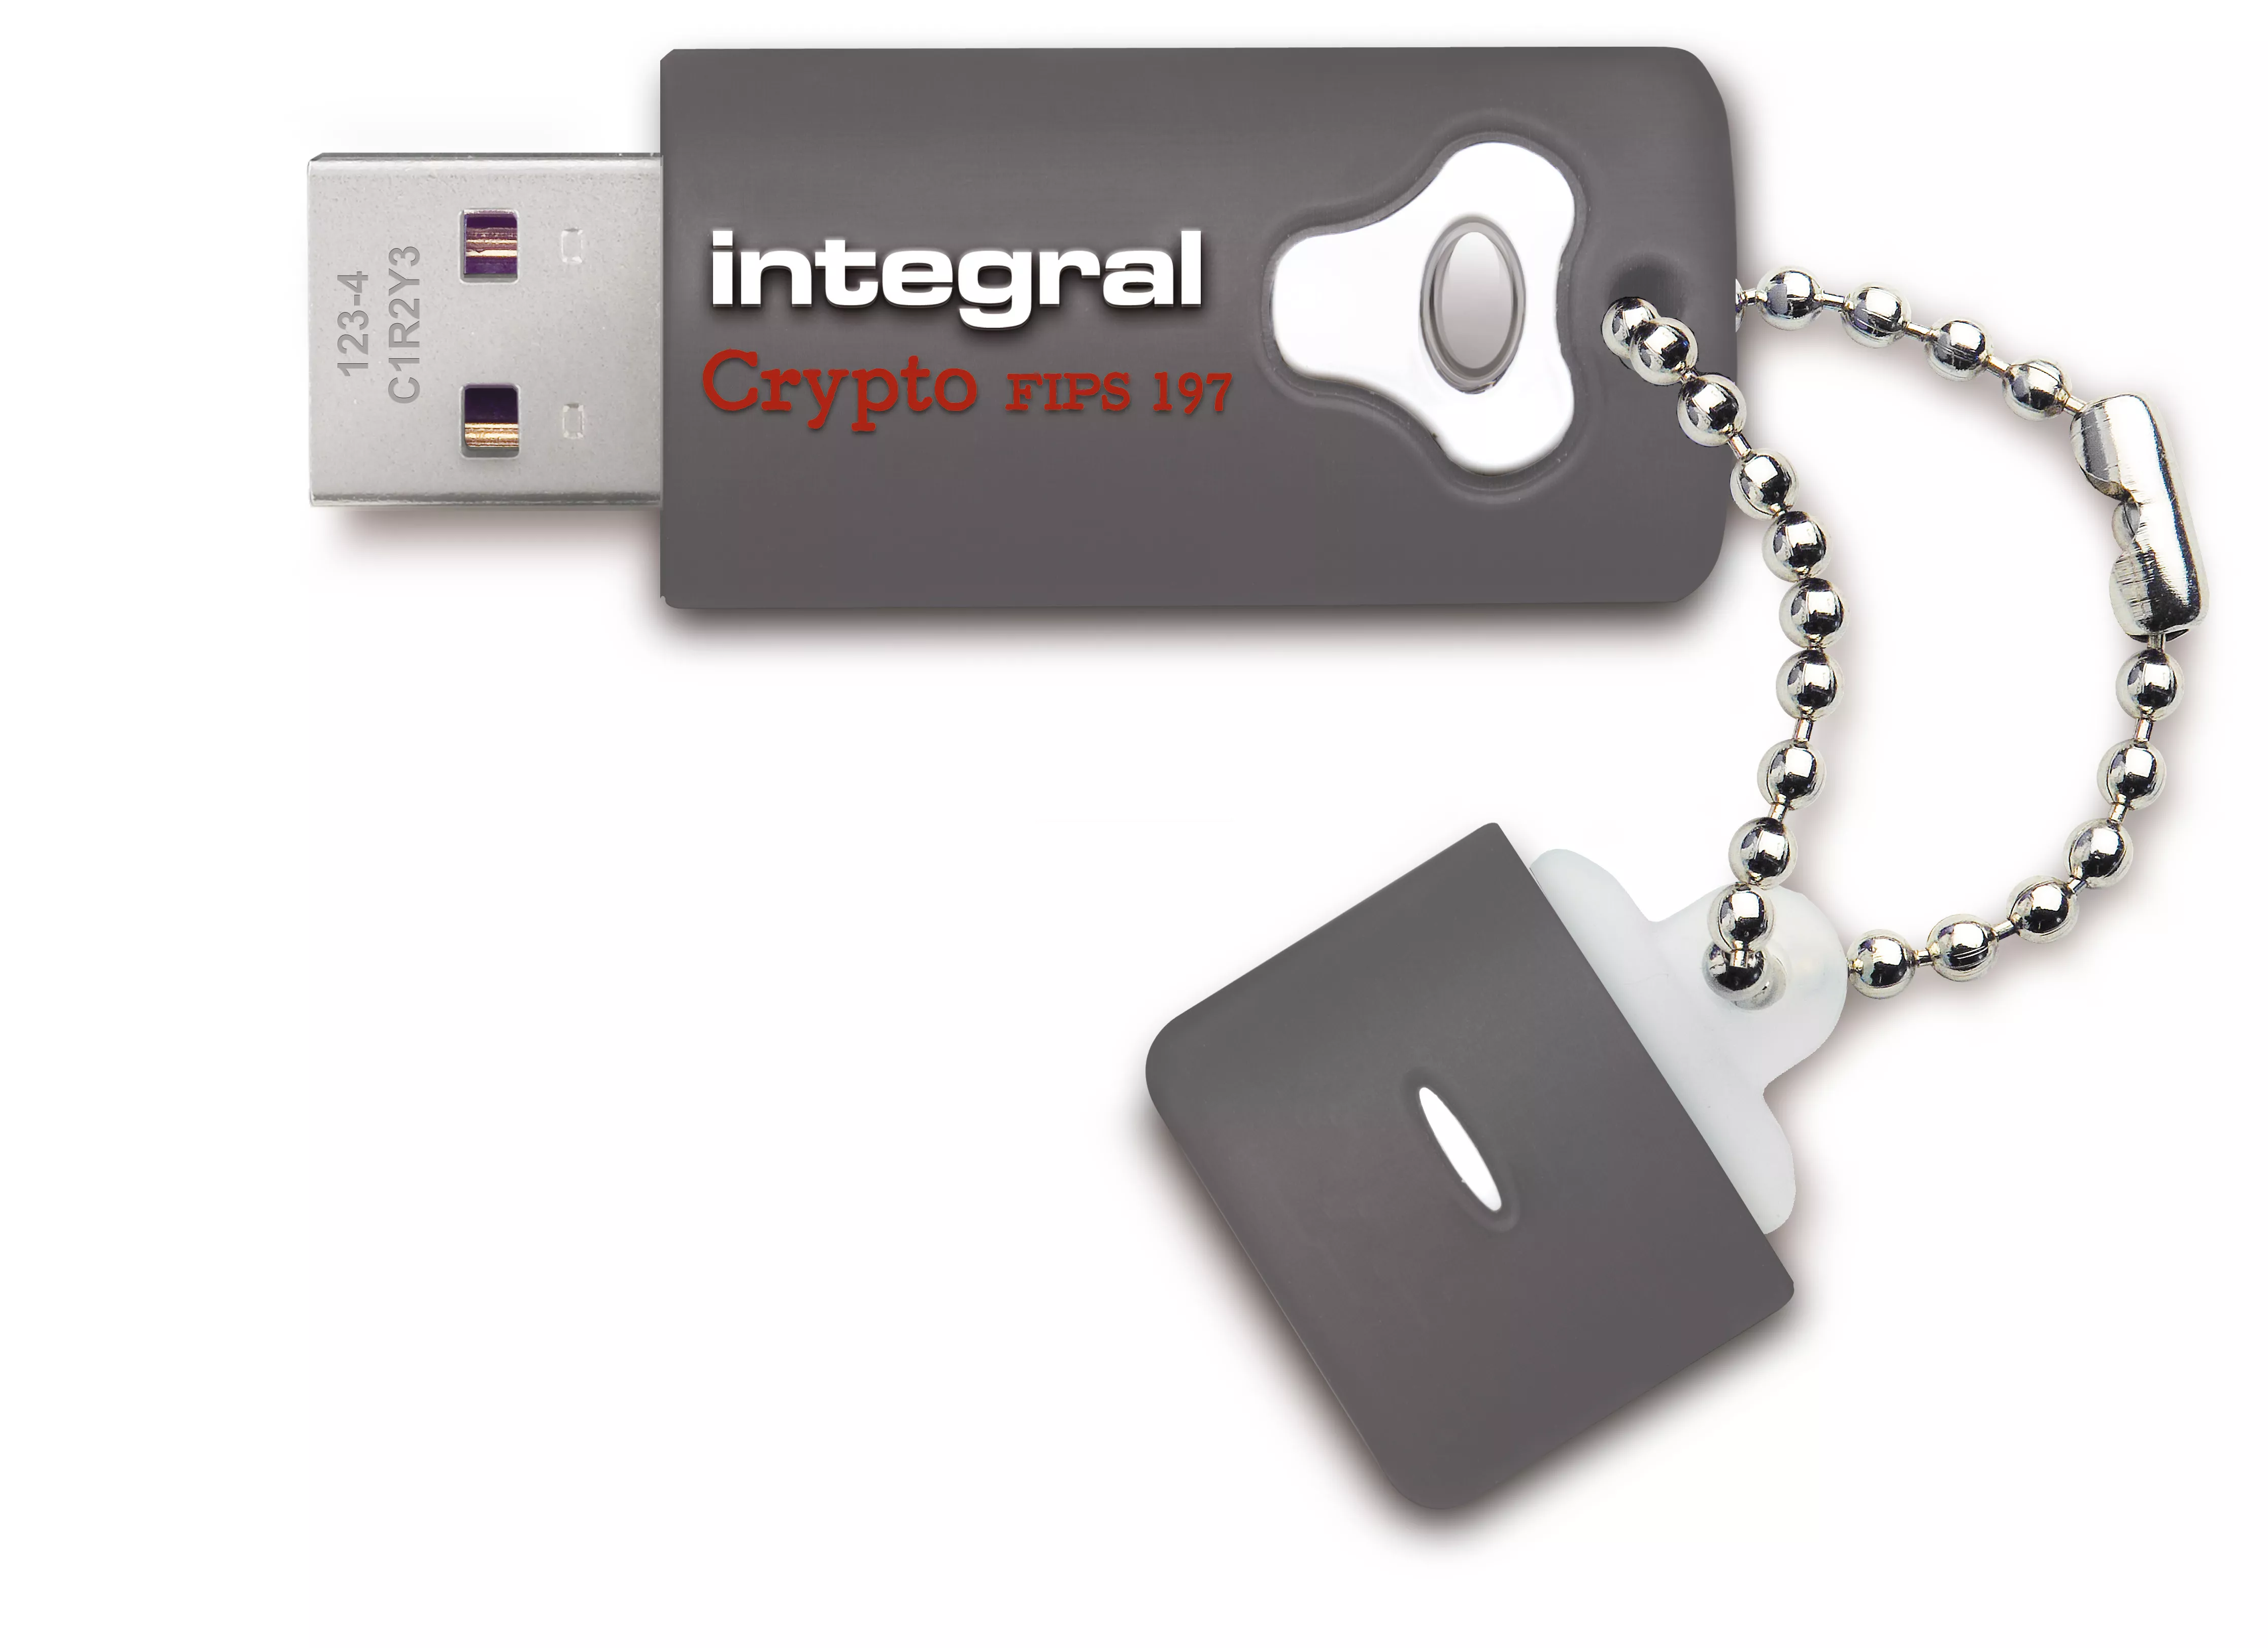 Achat Integral 16GB Crypto Drive FIPS 197 Encrypted USB 3.0 sur hello RSE